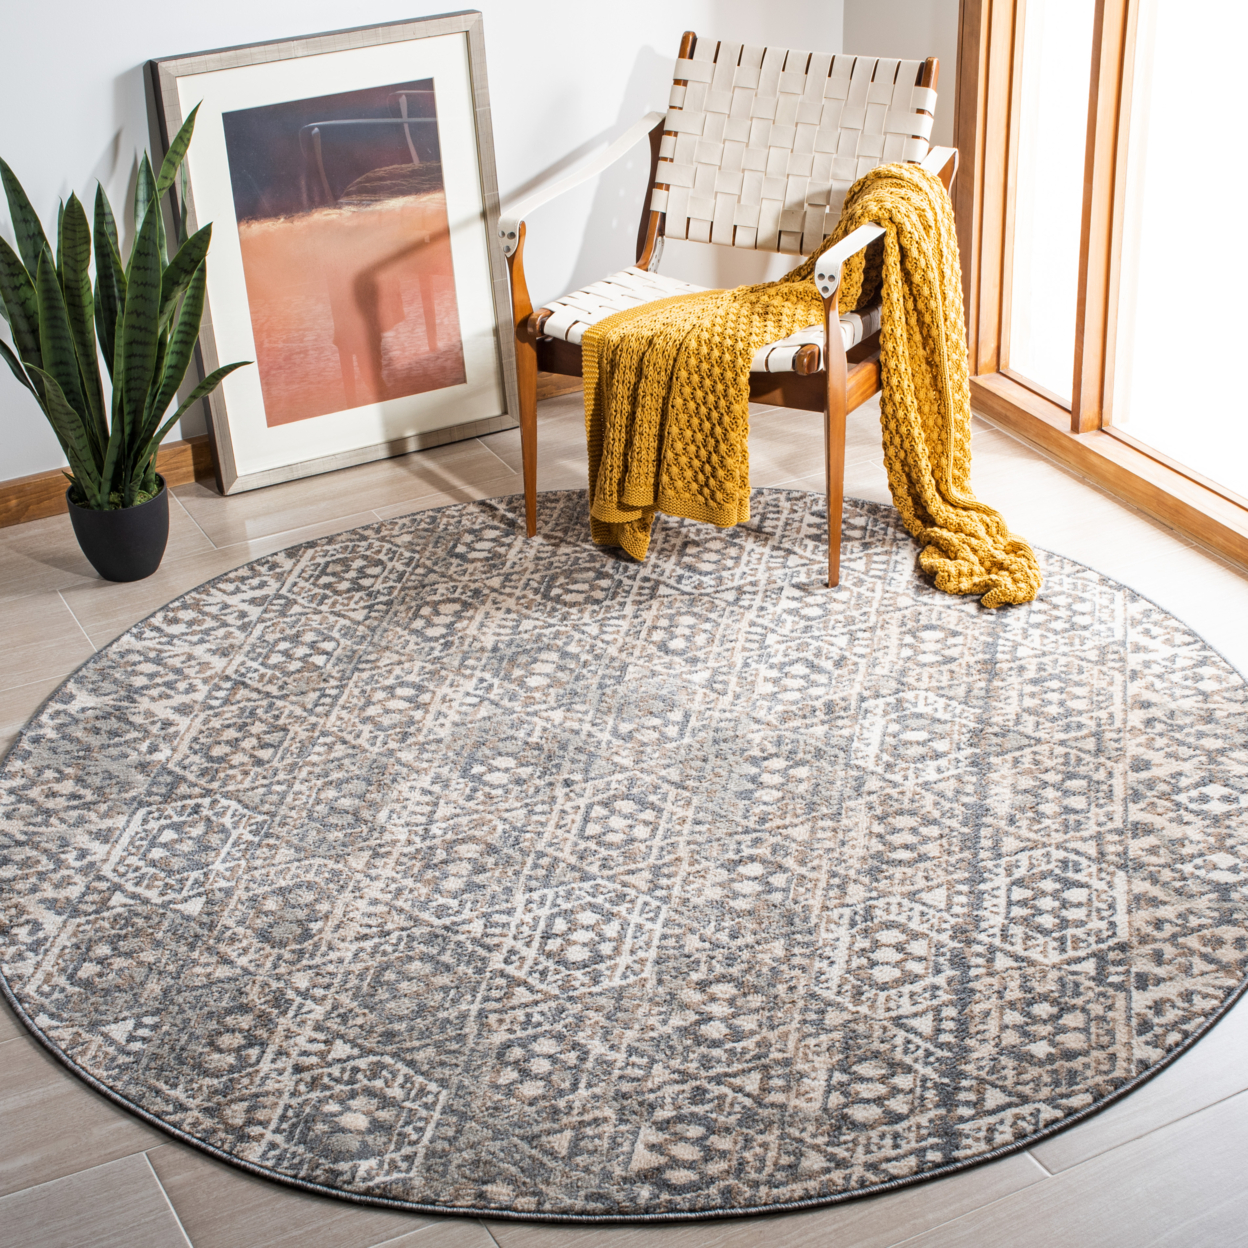 SAFAVIEH Pyramid Collection PYR260A Ivory / Charcoal Rug - 6-7 X 6-7 Round